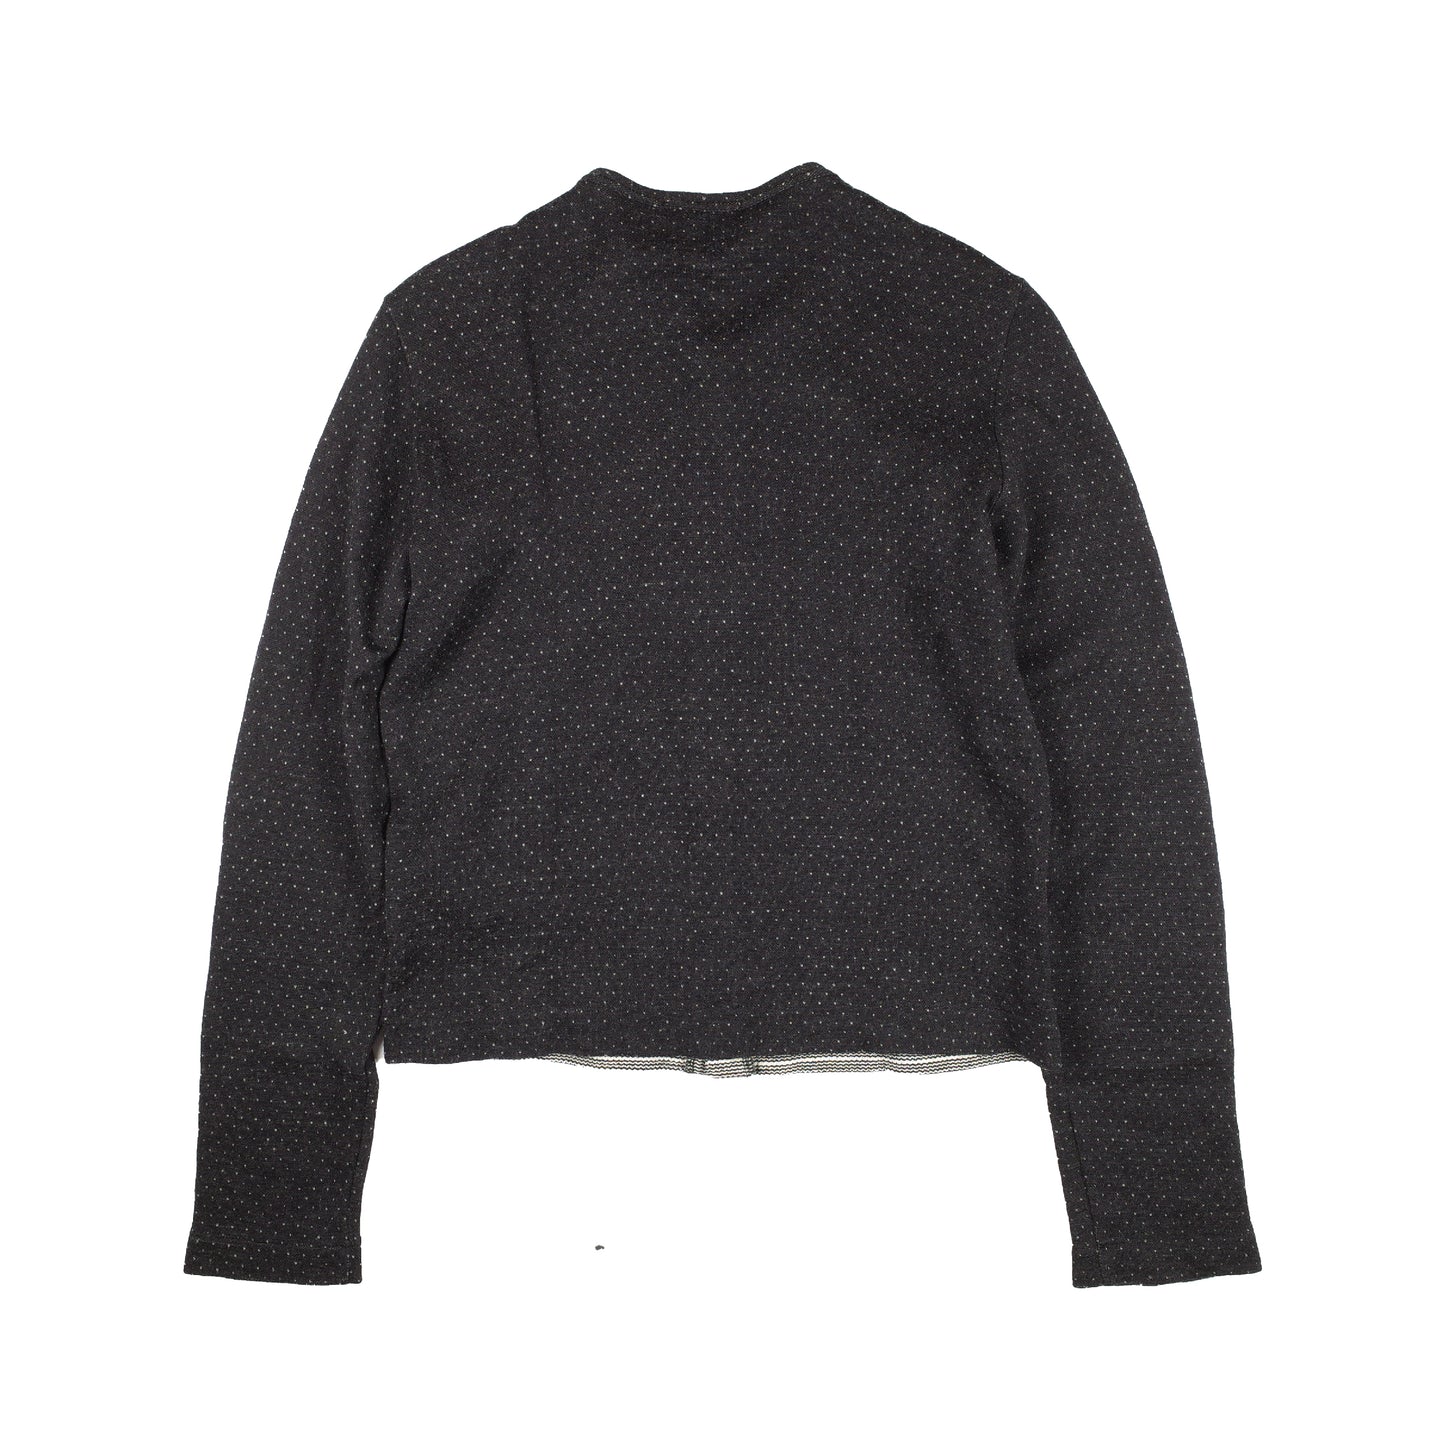 CDG Tricot Contrasted Knit Cardigan